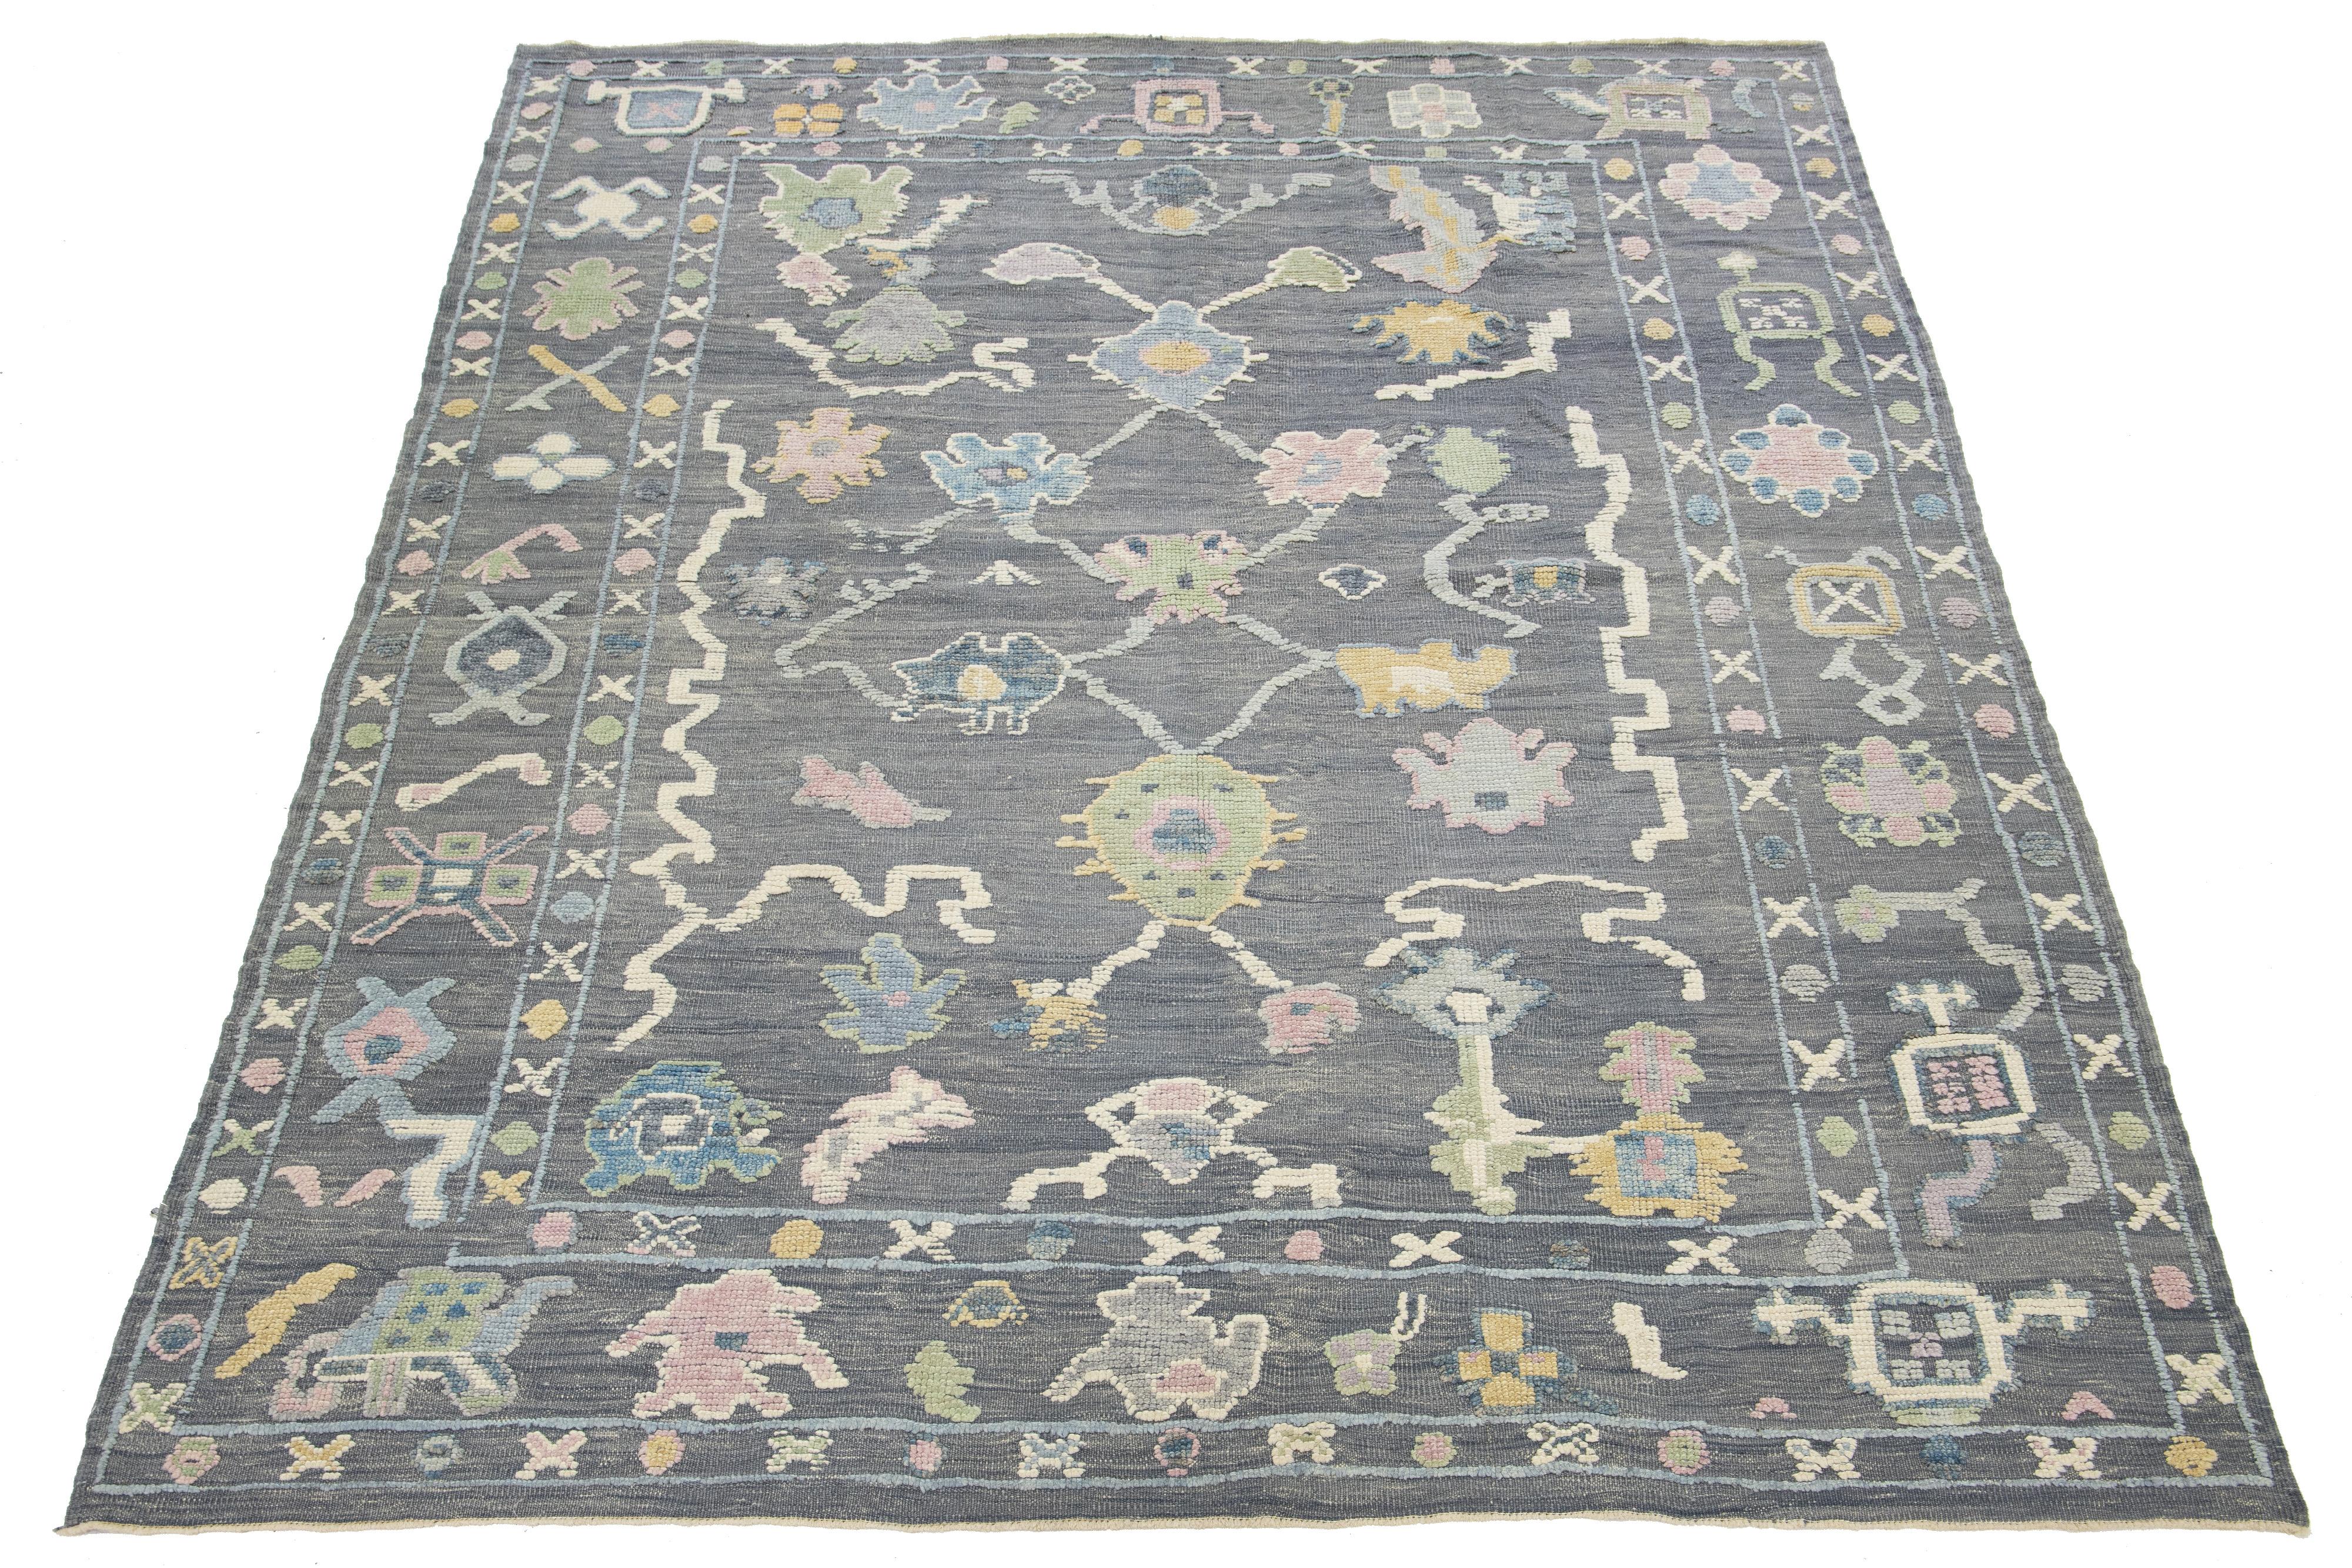 This exquisite hand-knotted wool rug boasts a stunning gray base embellished with a captivating multicolor floral pattern. 

This rug measures 9'3